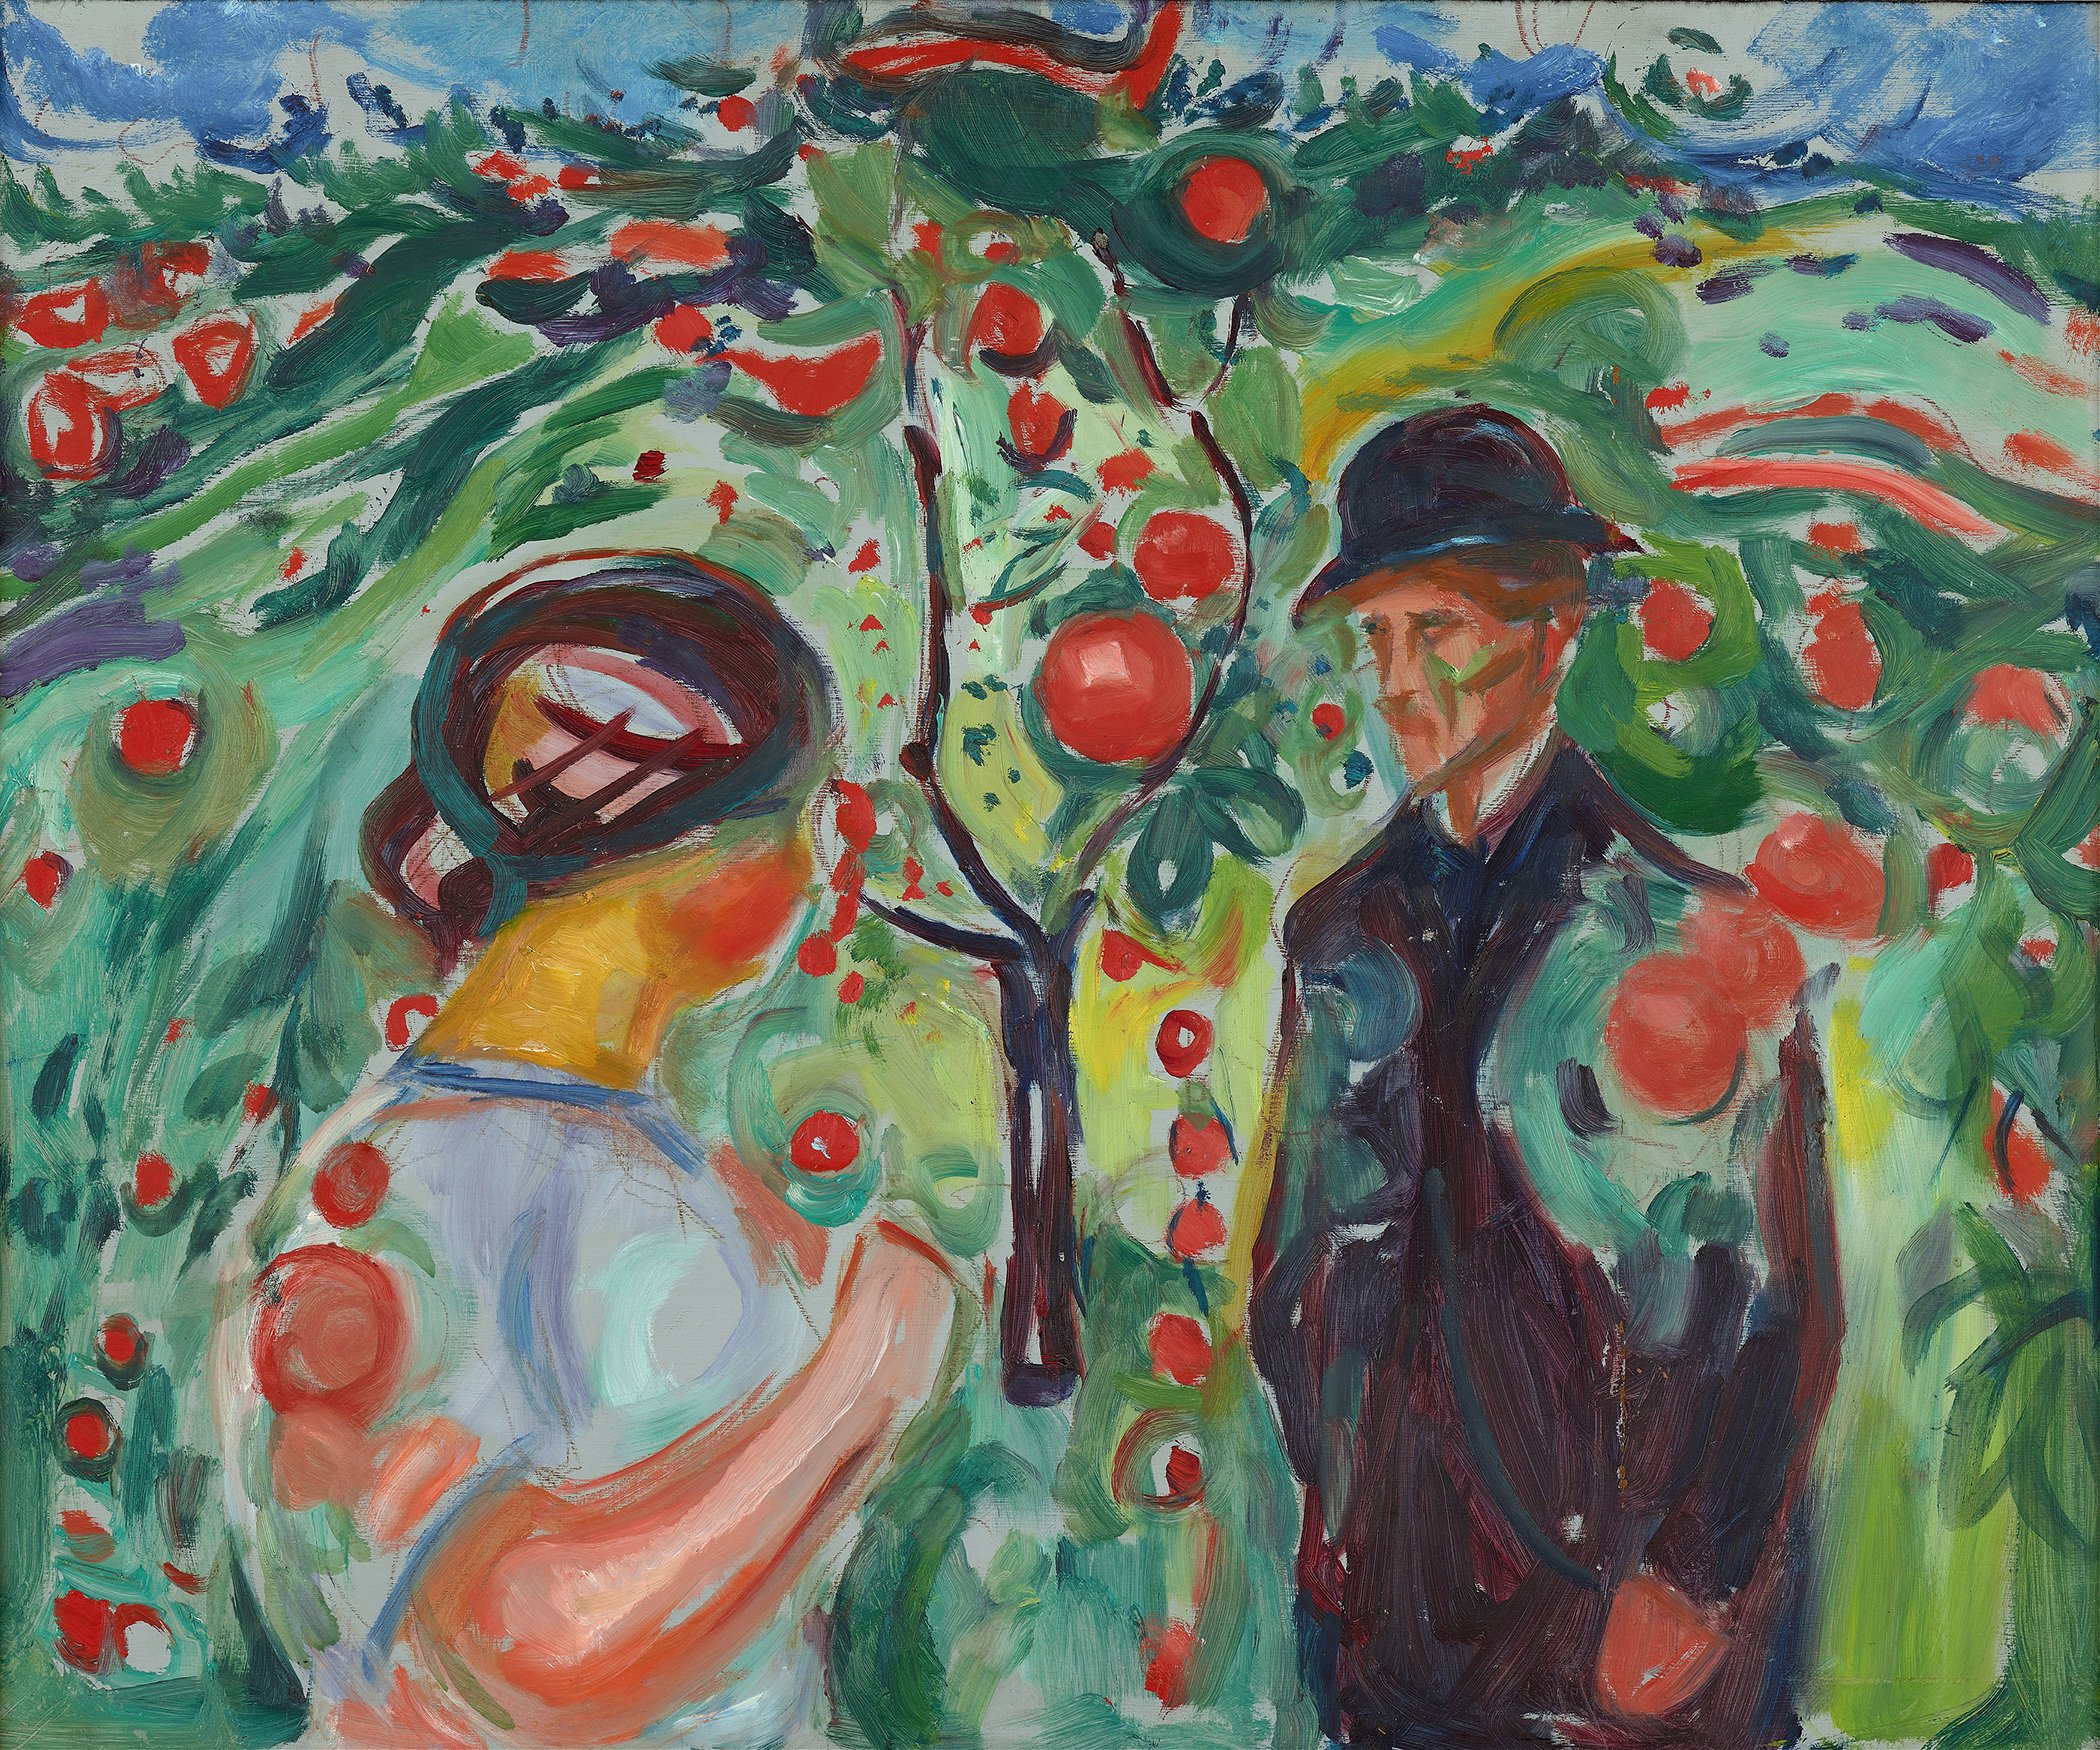 Beneath the Red Apples (1927–30)